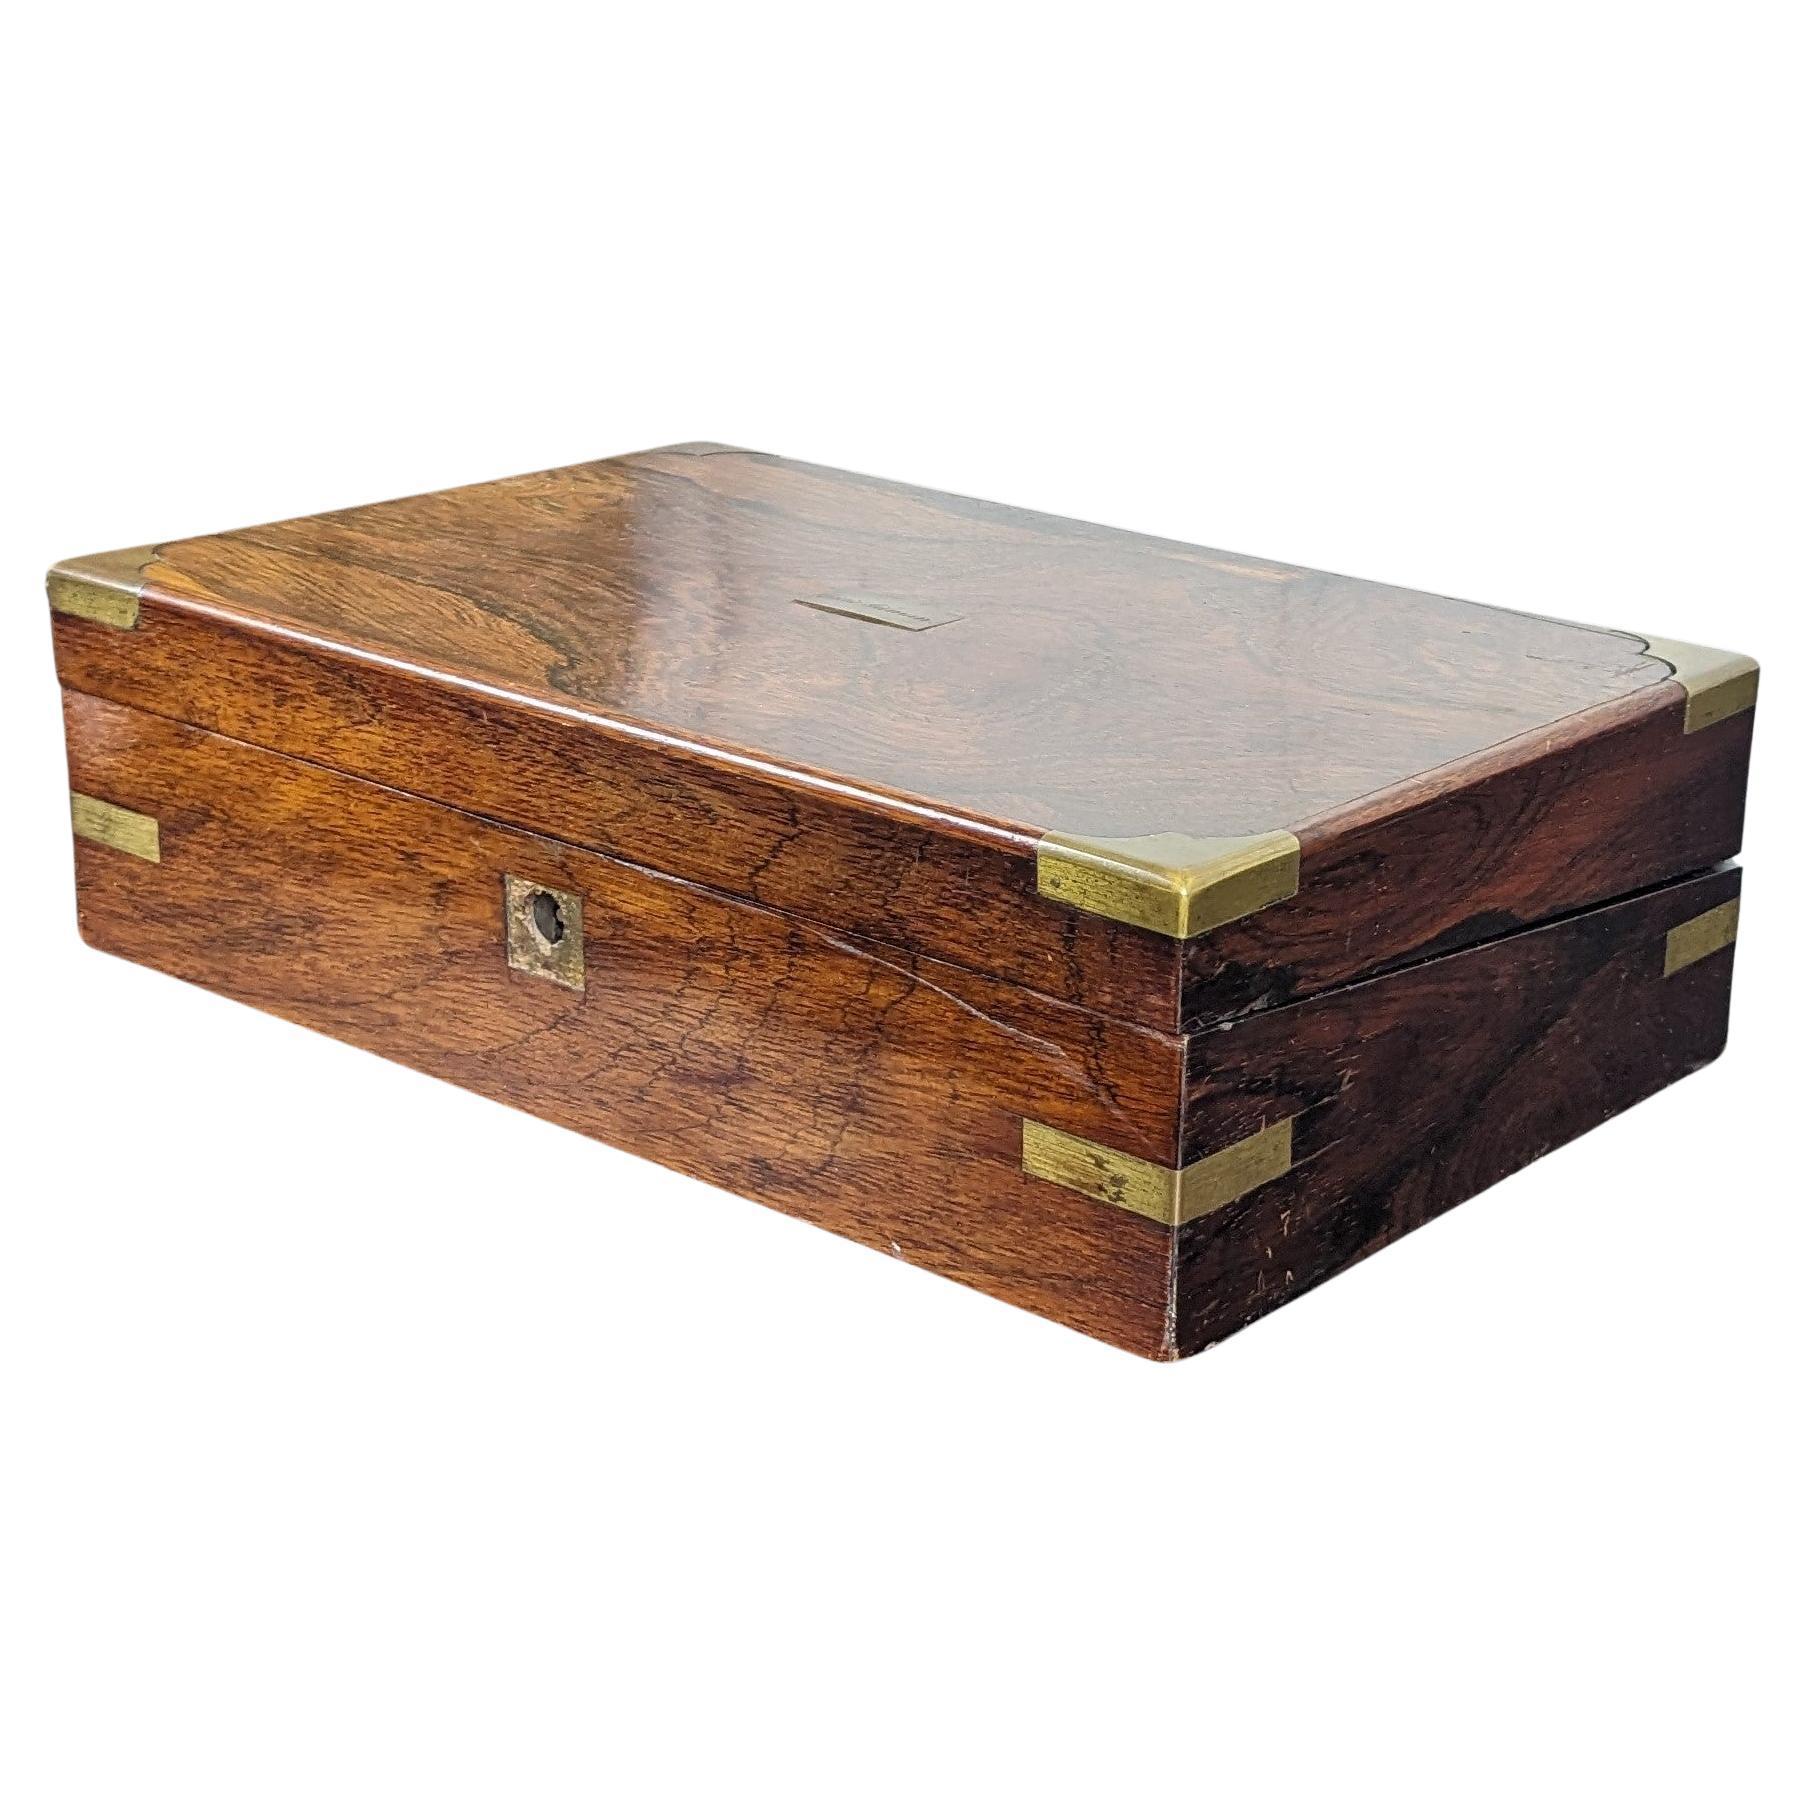 Antique 19th Century English Georgian campaign writing slope, box or travel desk.  Made of walnut feautring rectangular form with brass banding.  Opens to purple velvet interior with multiple storage compartments and writing surfaces.

At one point